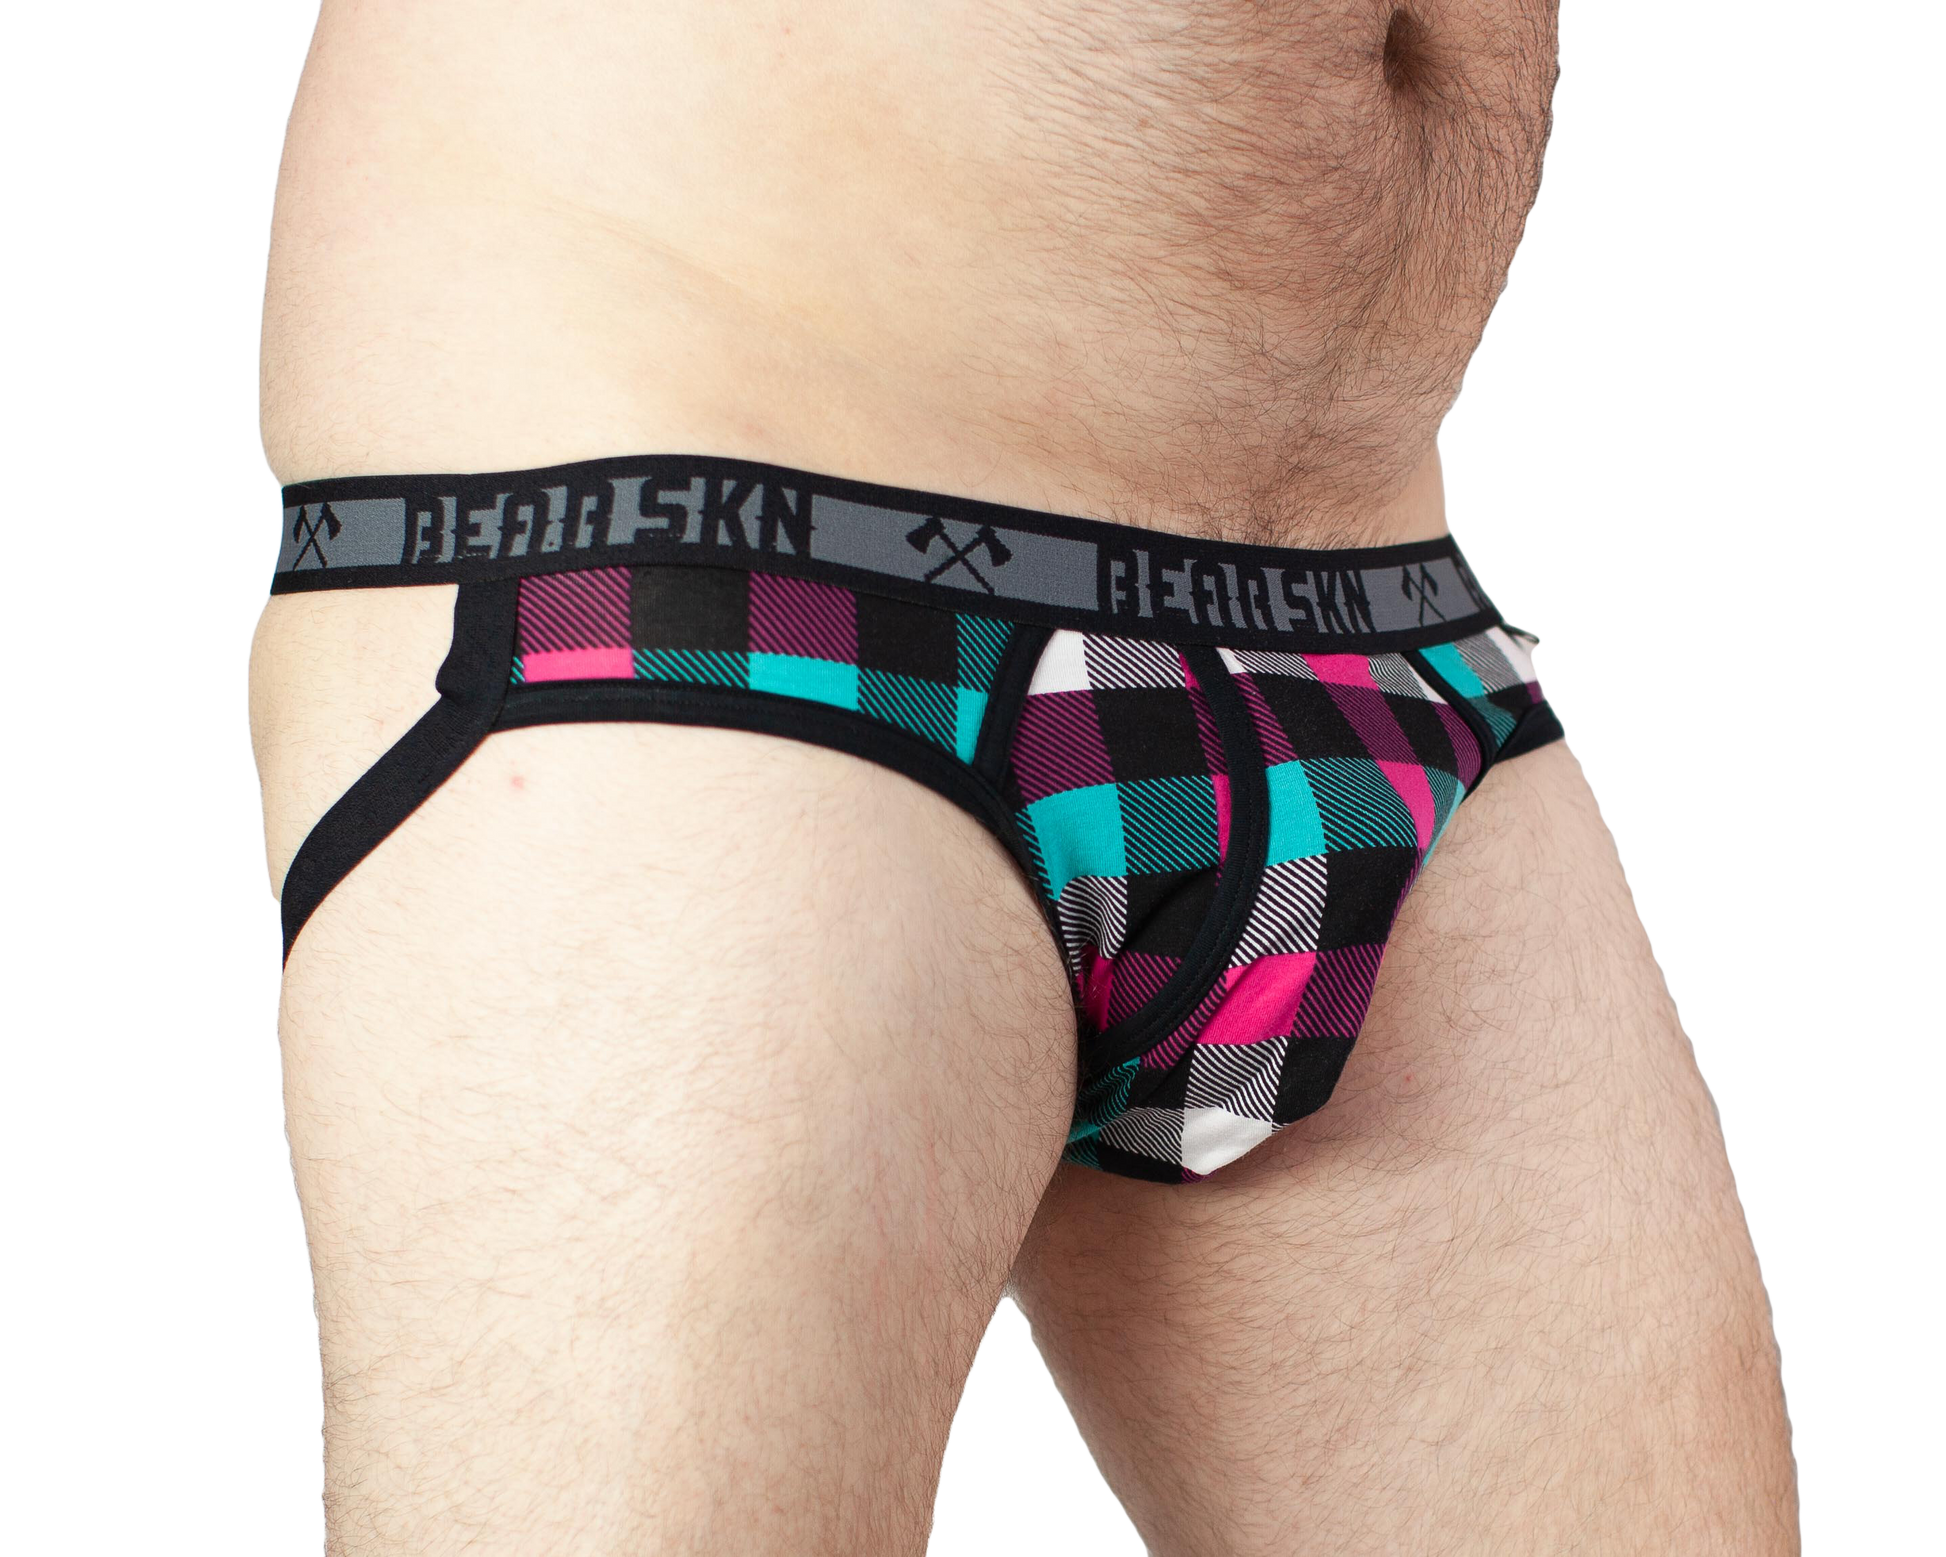 The front and right side of the Miami Backwoods Jockstrap.